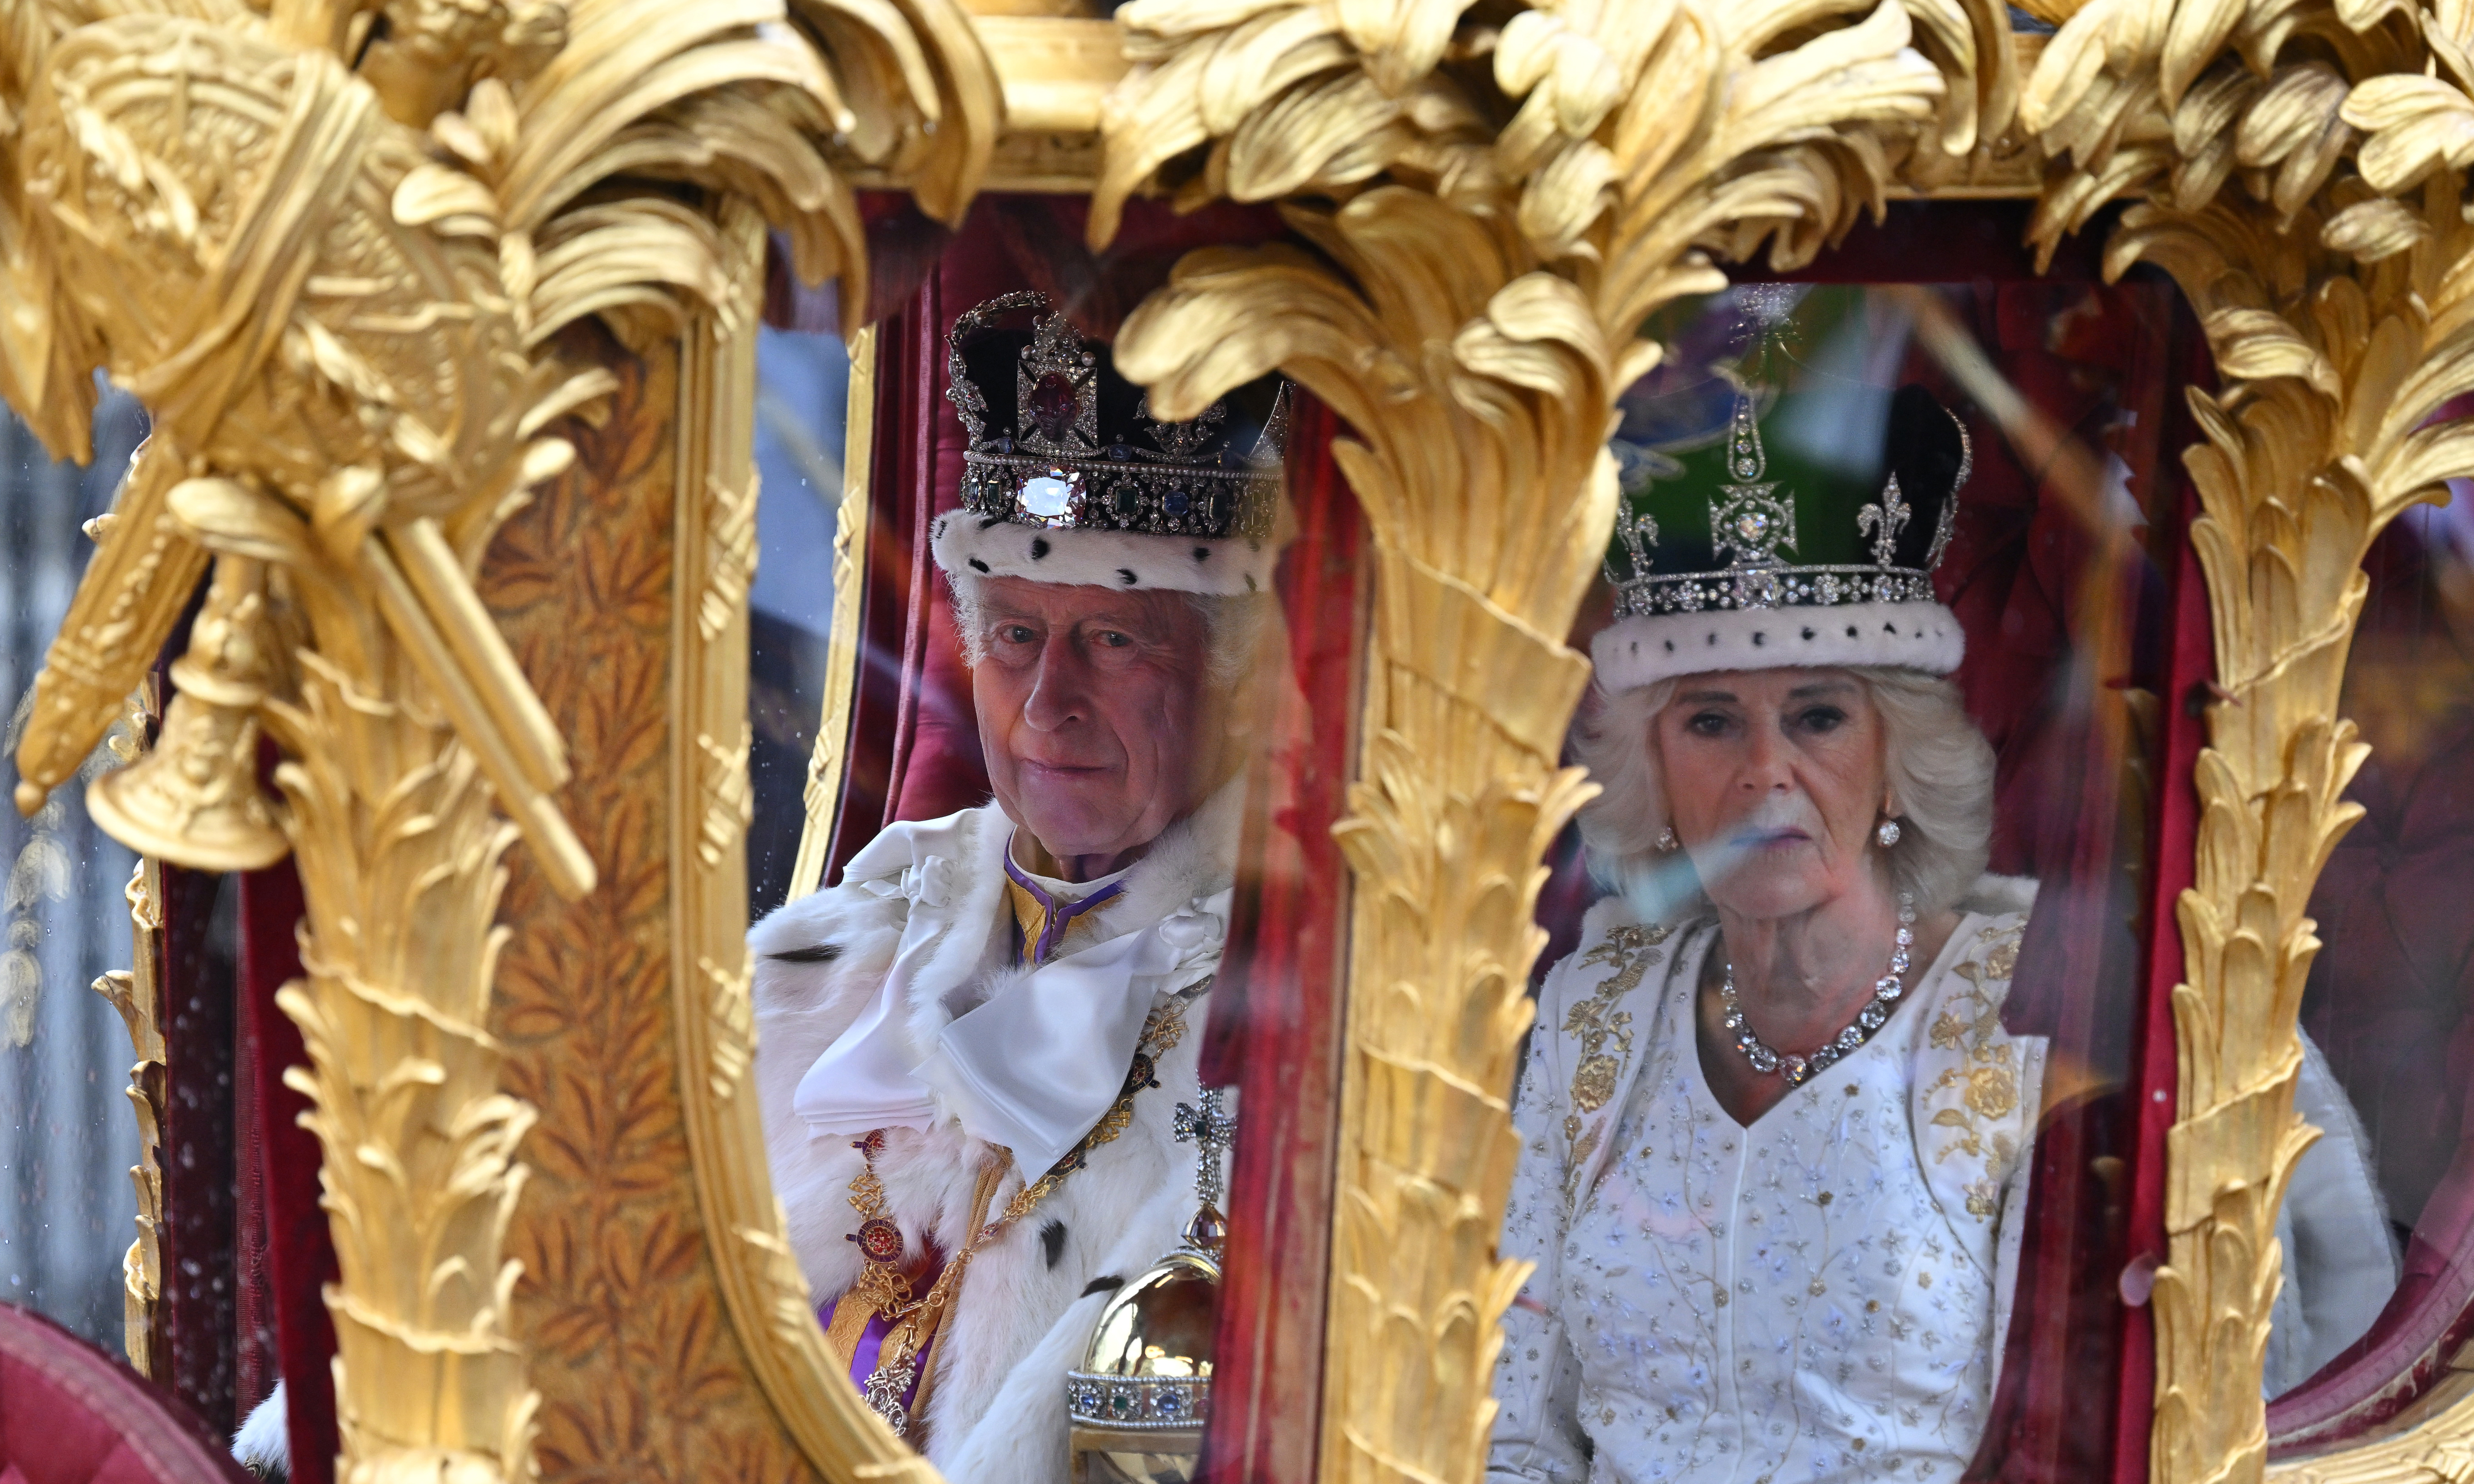 Britain’s King Charles III and Britain’s Queen Camilla travel in the Gold State Coach, built in 1762, back to Buckingham Palace from Westminster Abbey in central London on May 6, 2023, after their coronations.